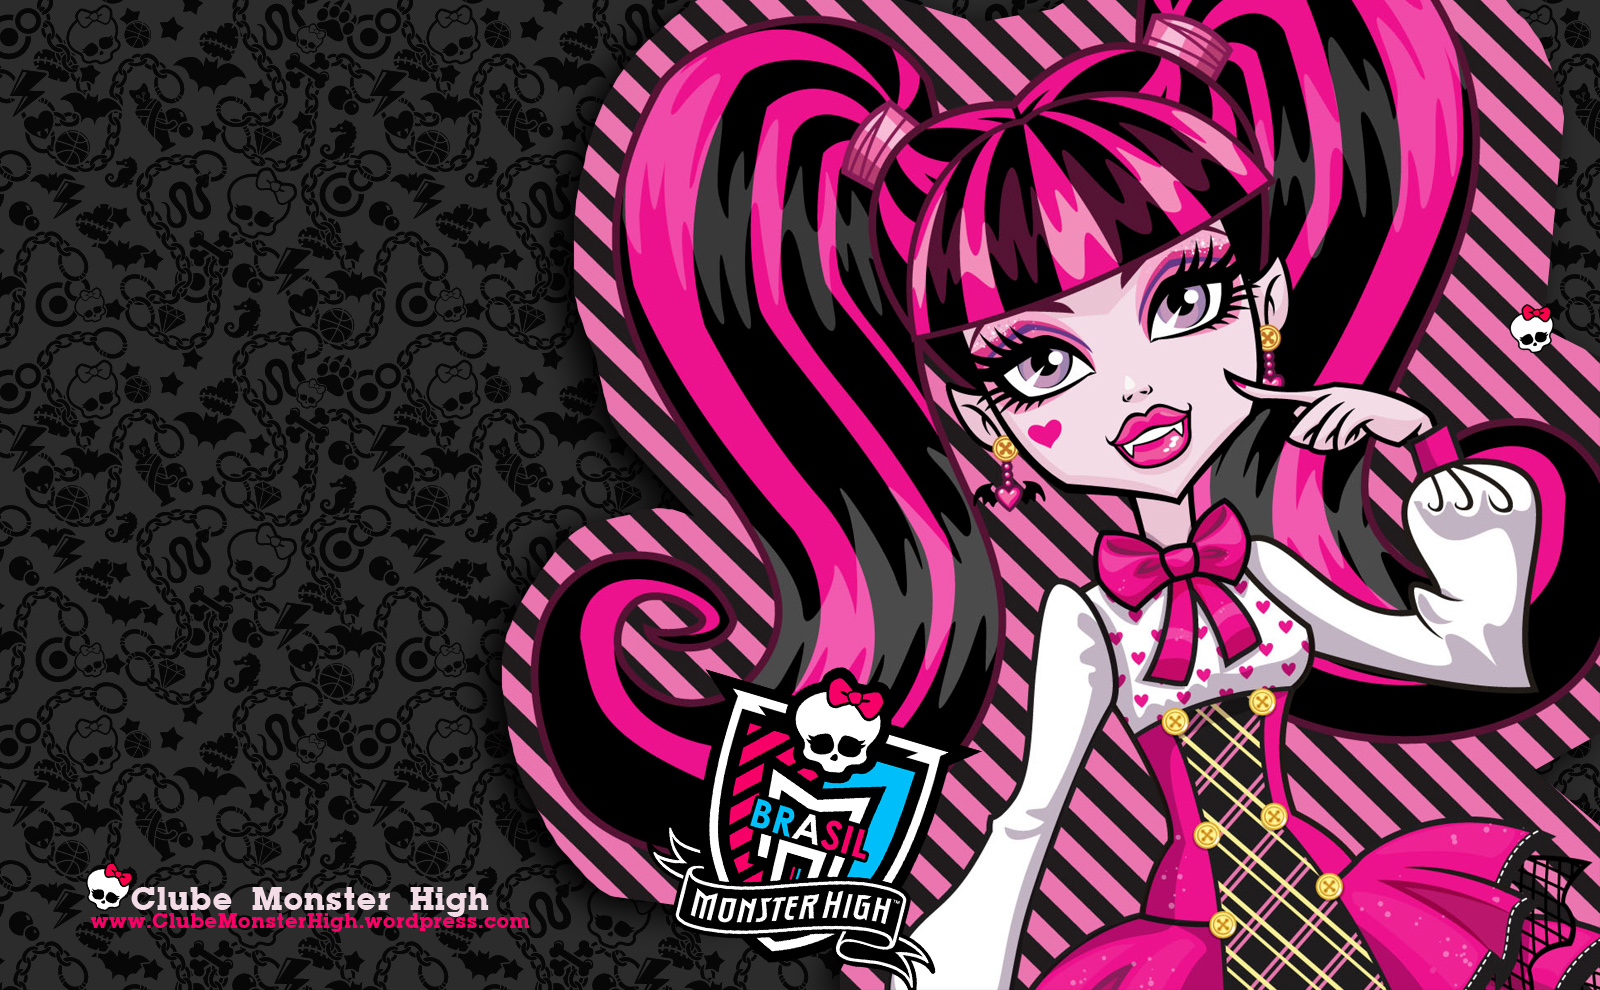 Monster High Background Draculaura Posted By Clube